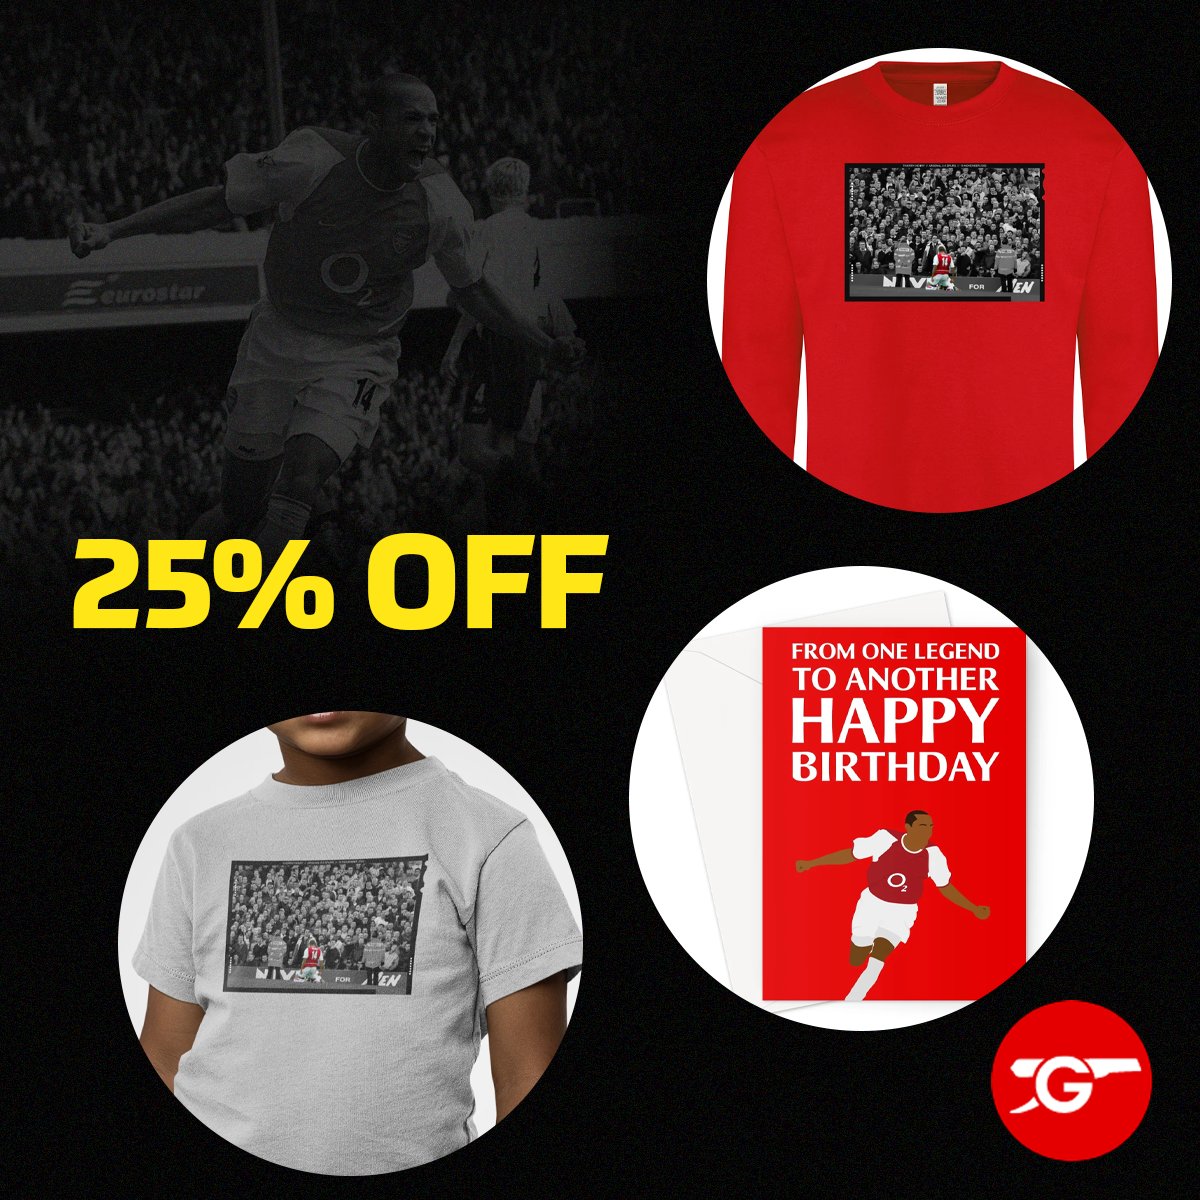 To mark the anniversary of the final North London derby at Highbury, we have an exclusive deal only available until midnight 👀 25% OFF ALL THIERRY HENRY MERCH 👑 Don't miss out! Shop here 👉 gunners.com/sale #AFC